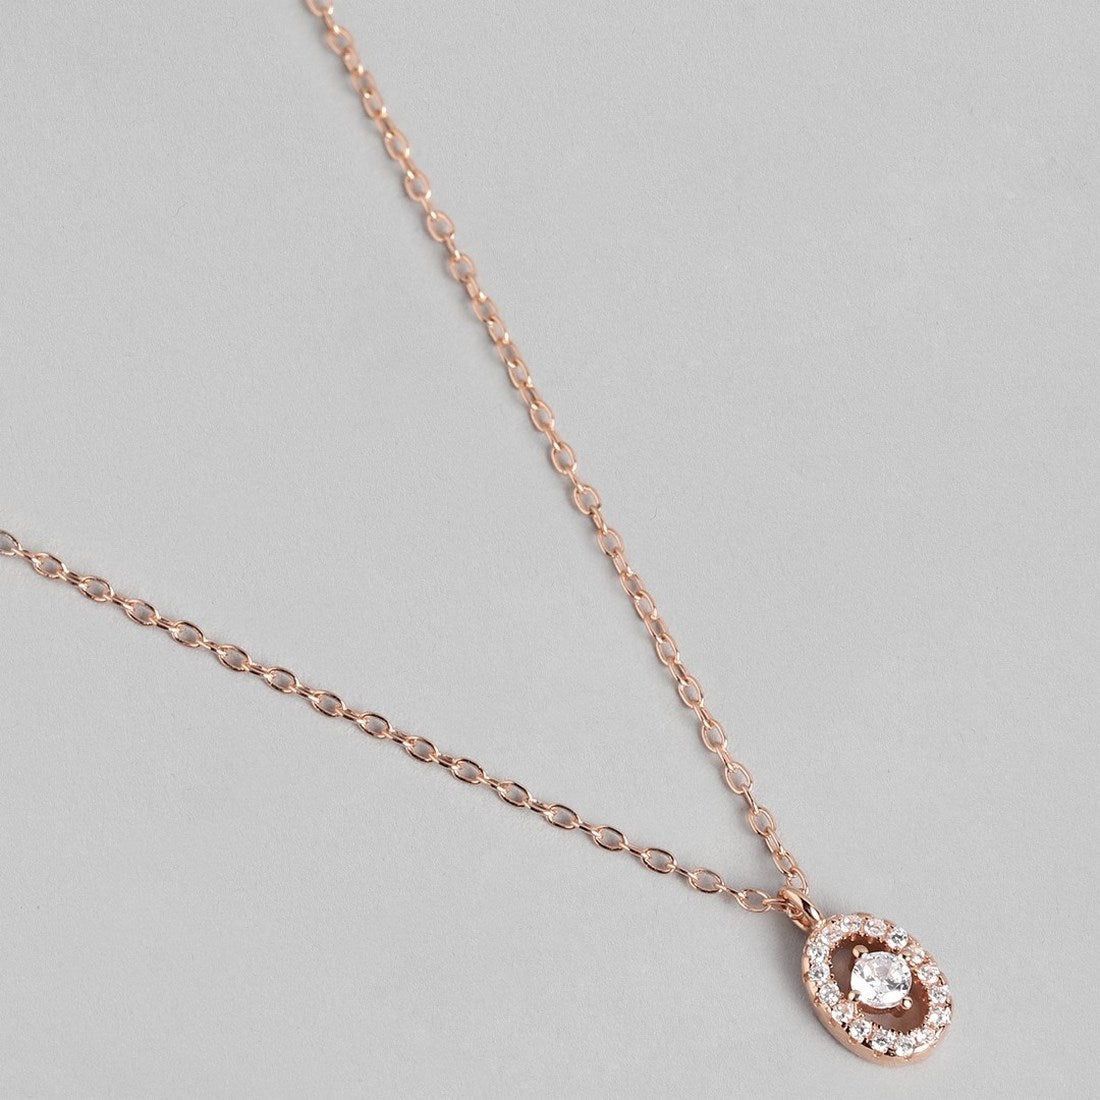 Radiant Elegance Rose Gold-Plated CZ Sterling Silver Oval Necklace with Chain